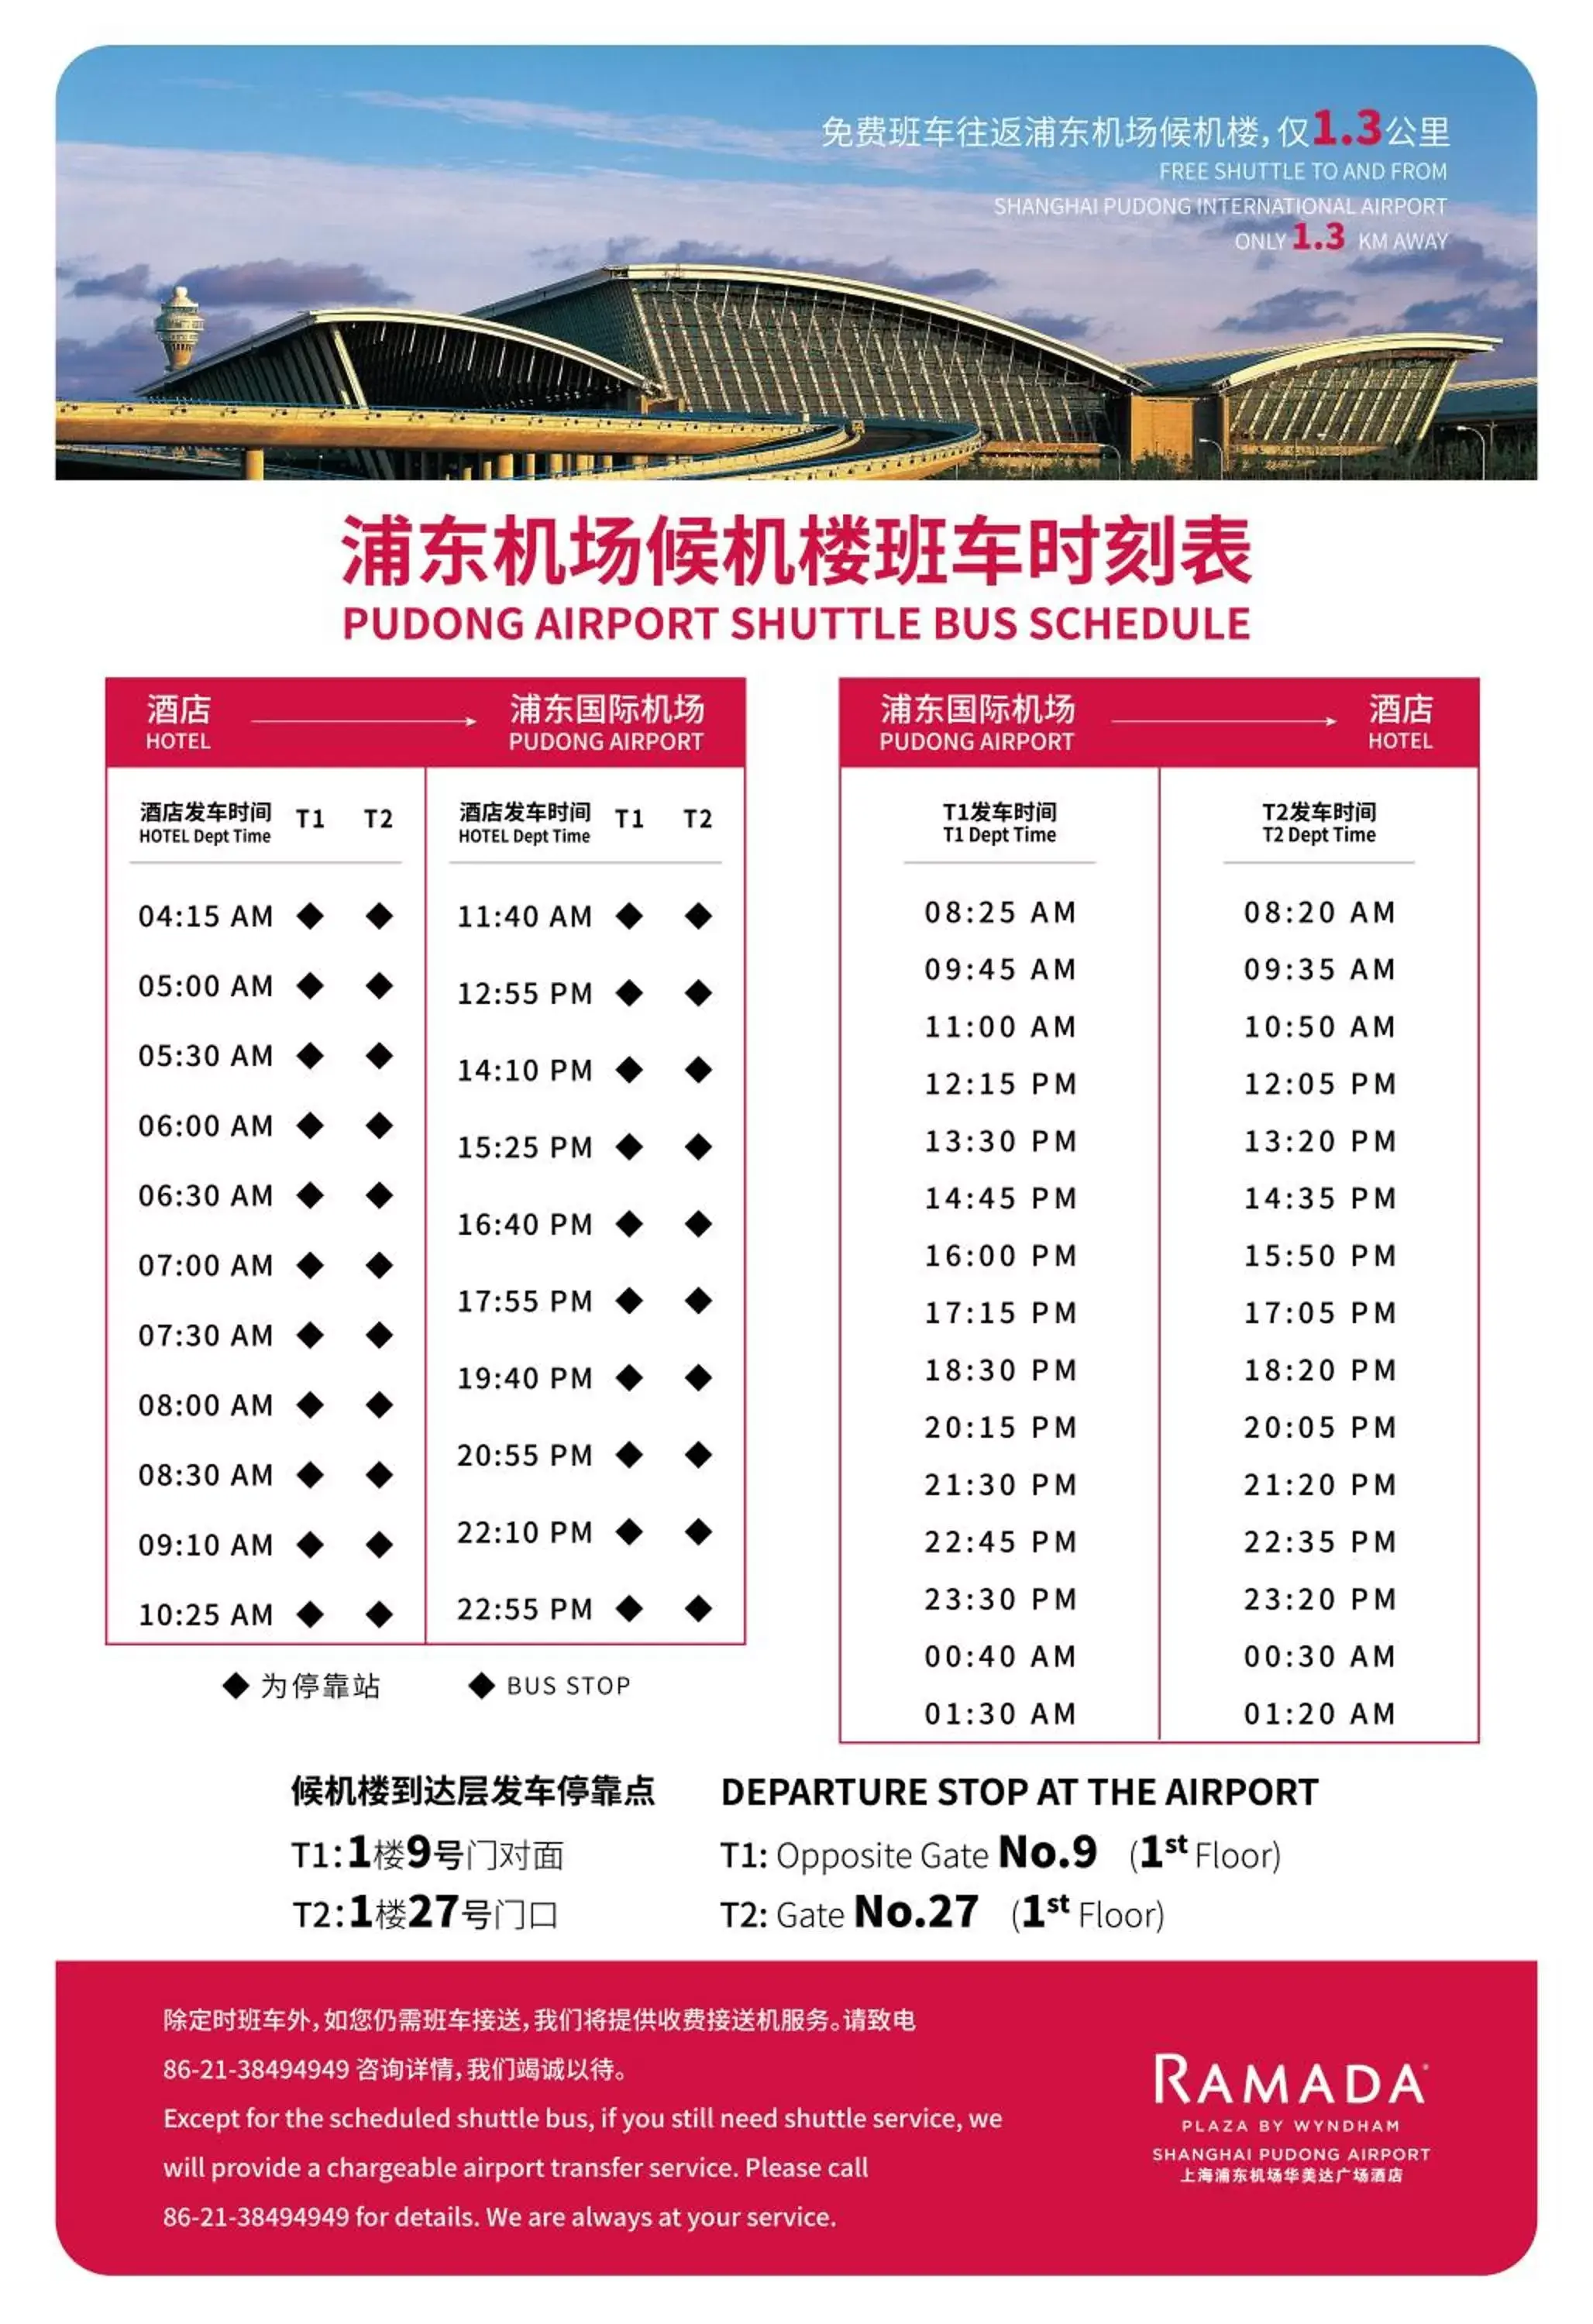 shuttle in Ramada Plaza Shanghai Pudong Airport - A journey starts at the PVG Airport